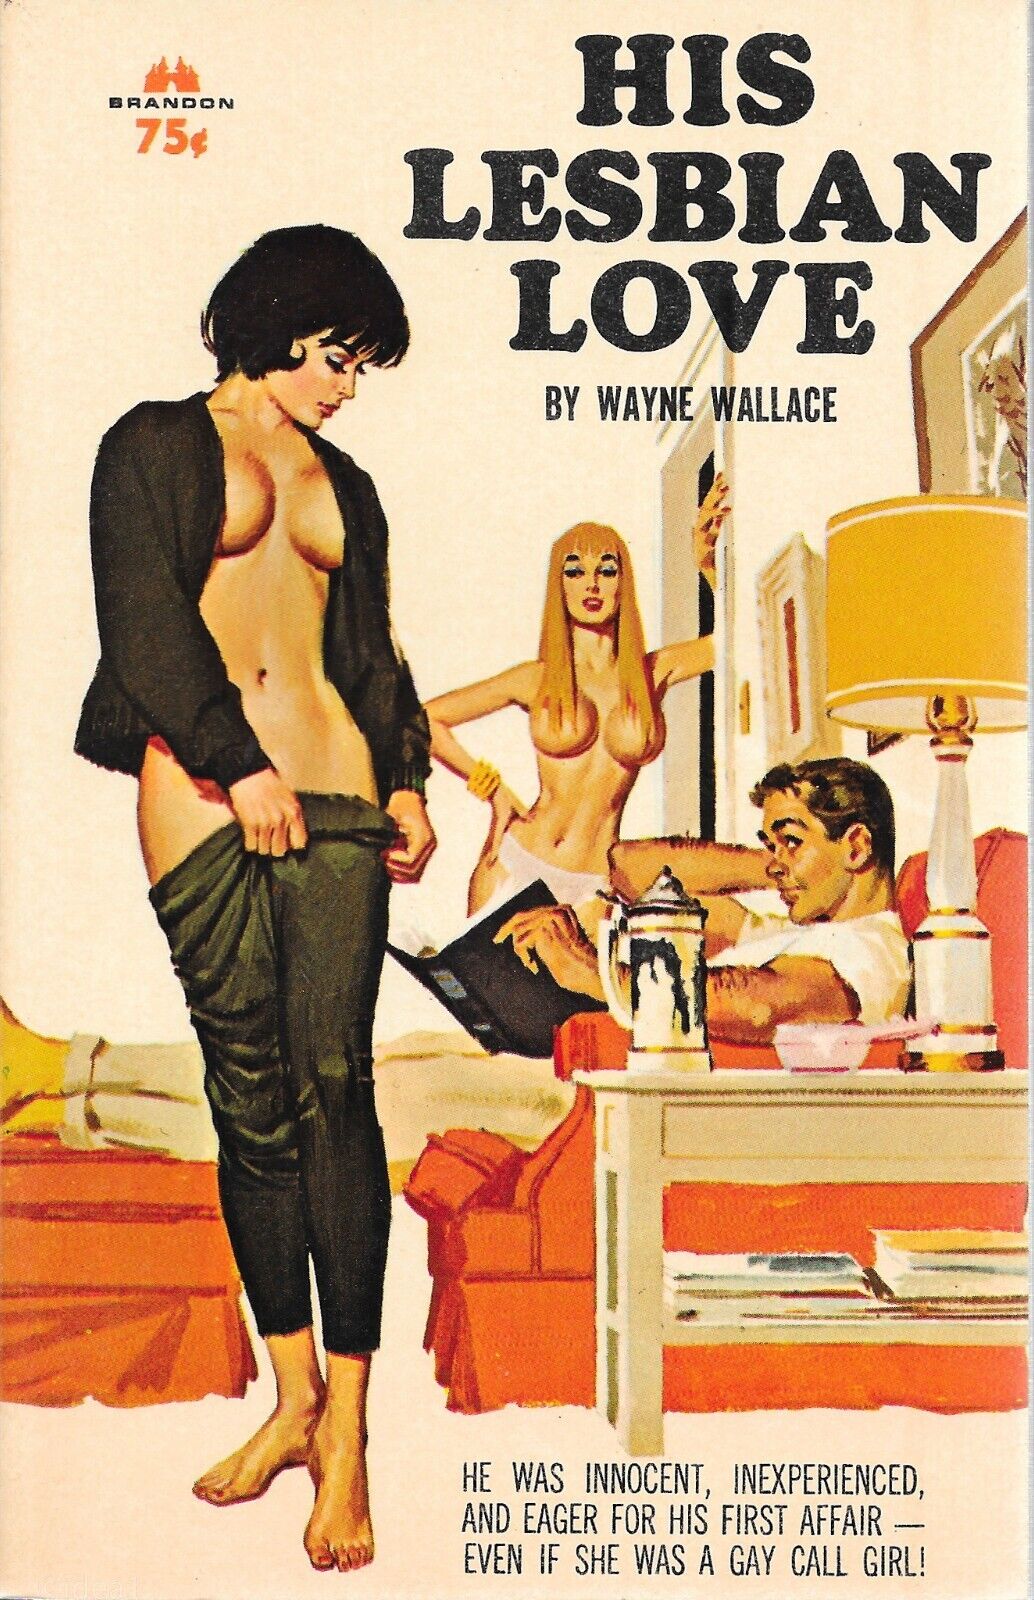 BH-0730_His_Lesbian_Love_by_Wayne_Wallace_[ILLUSTRATED]_EB